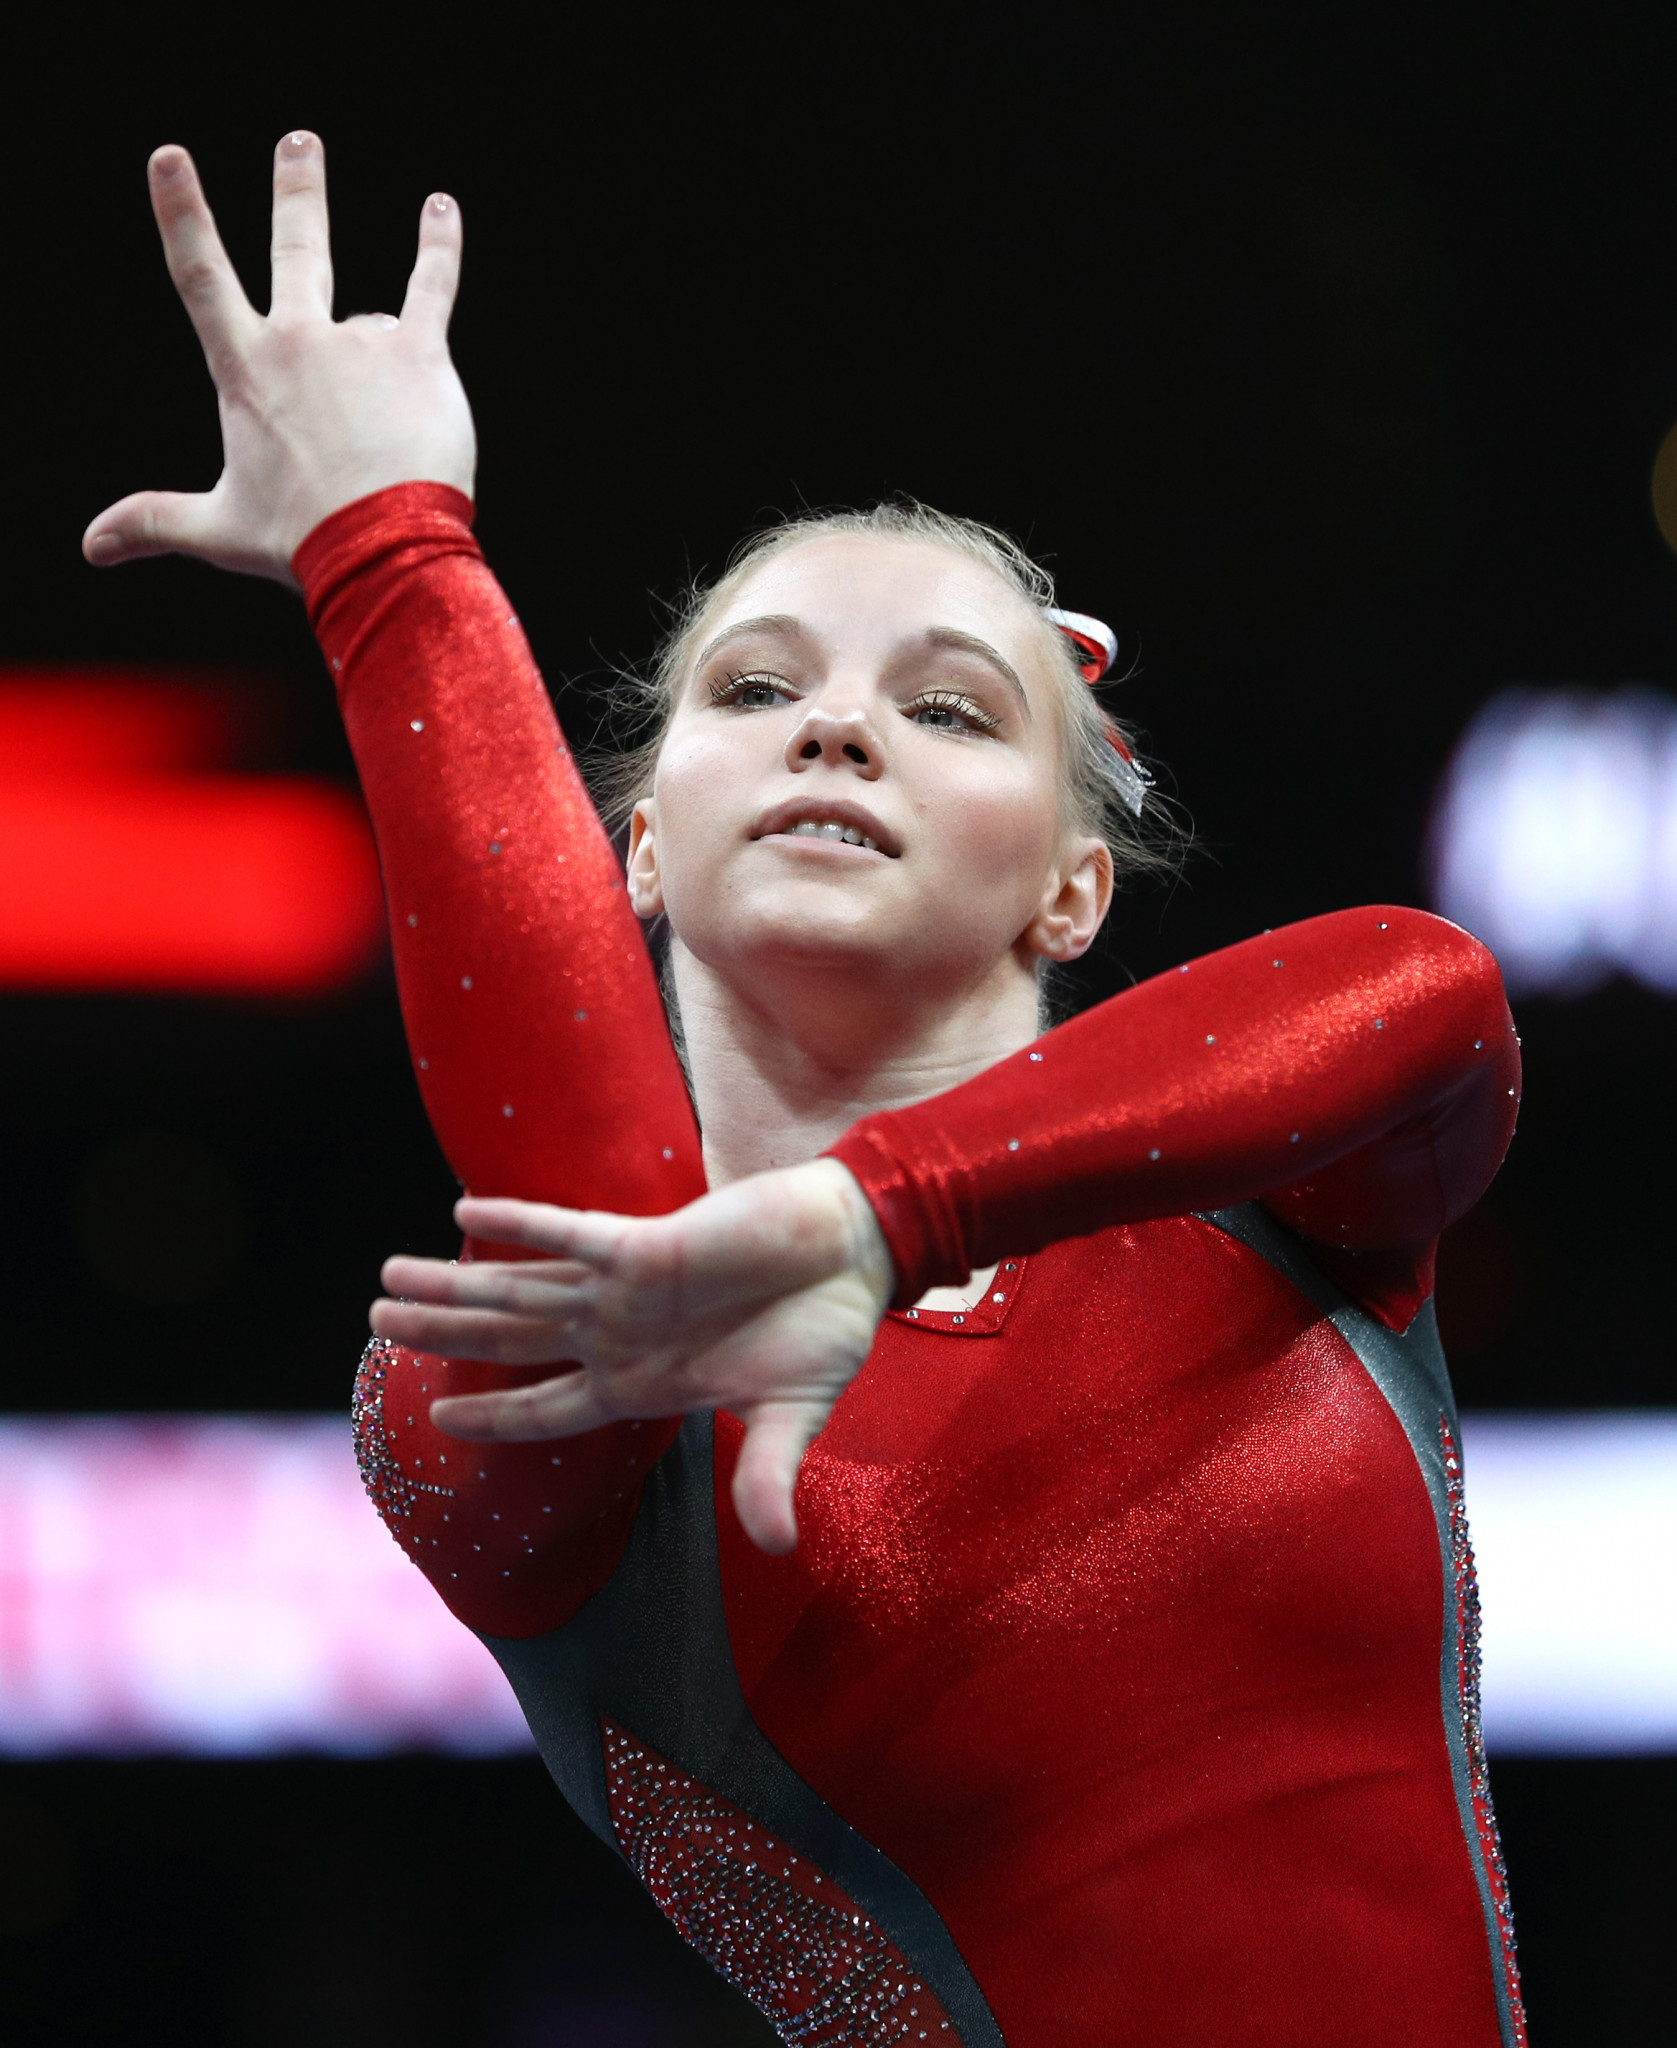 Canada's Jade Carey won the vault, scoring 14.766 points, at the FIG Individual Apparatus World Cup in Baku ©Getty Images